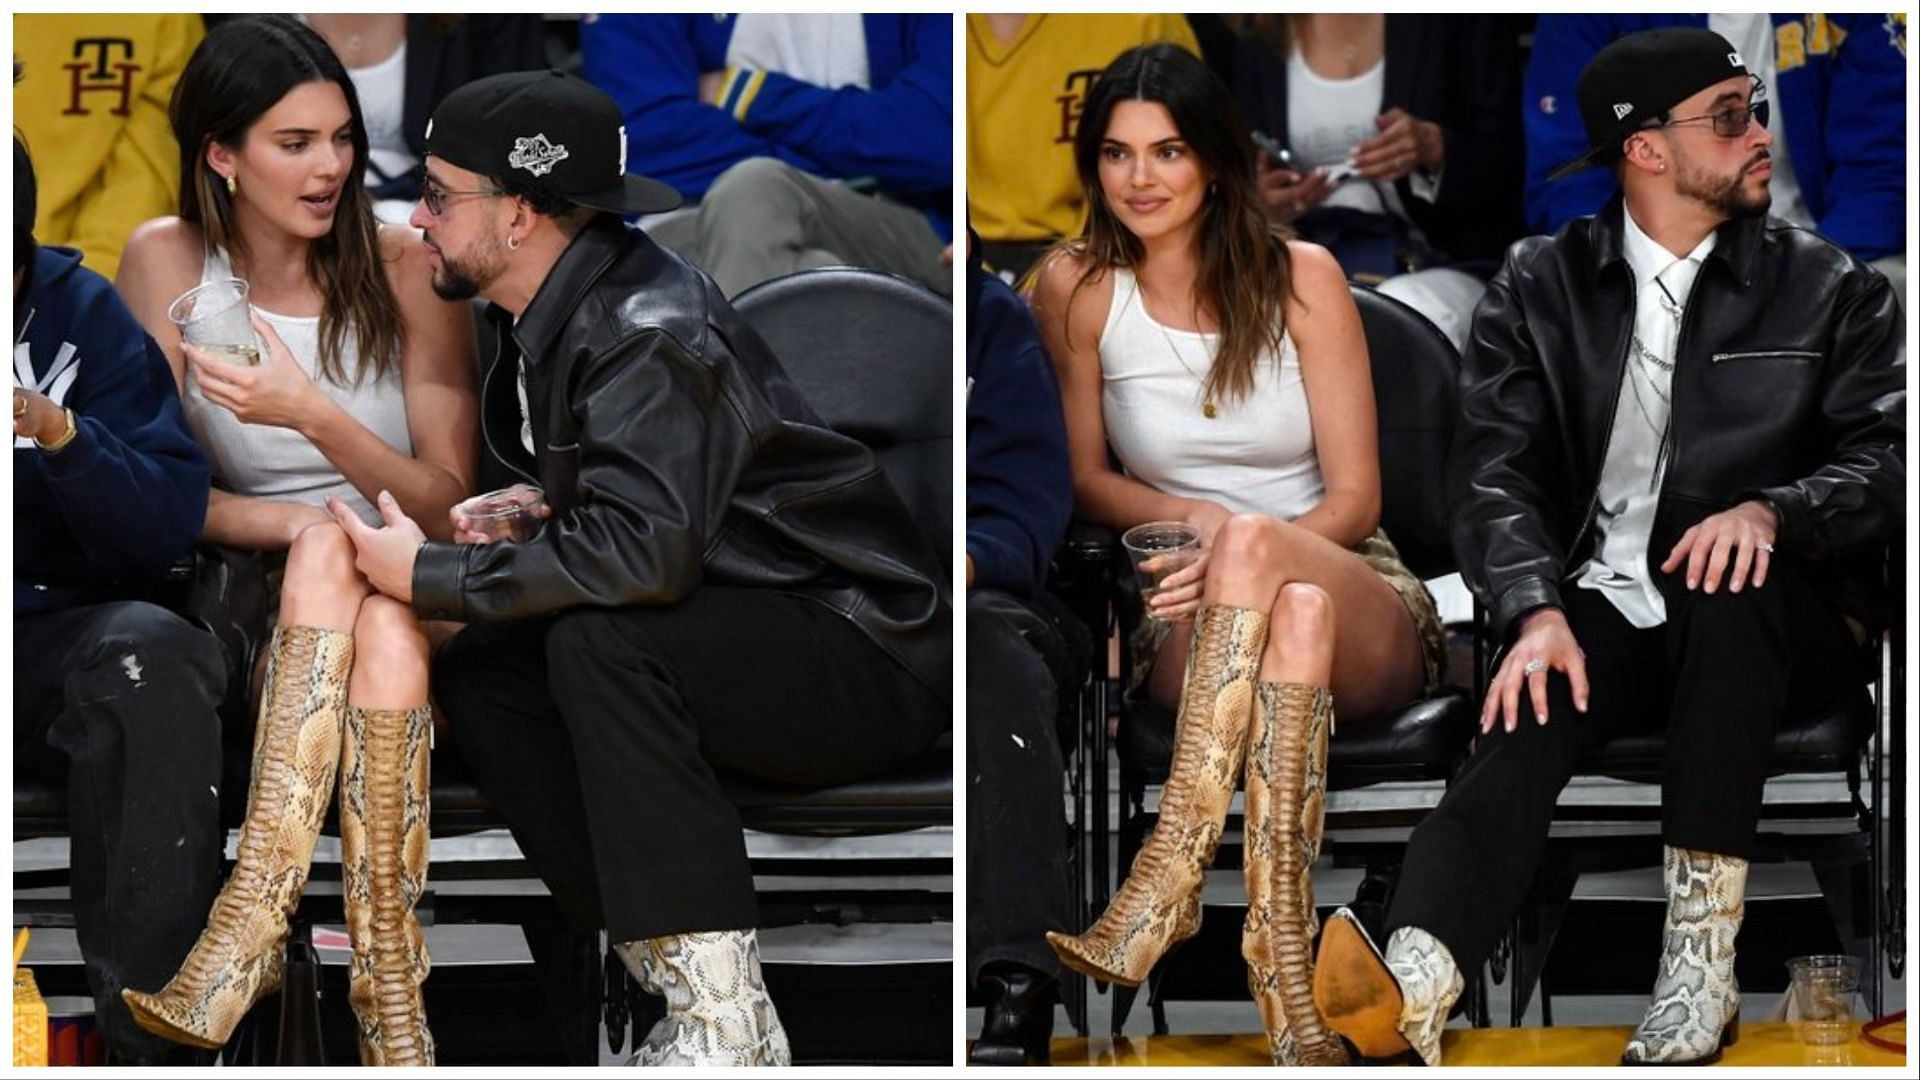 Bad bunny on the sideline speaking french to Kendal Jenner”: Pictures of  the duo go viral, spark meme fest on social media